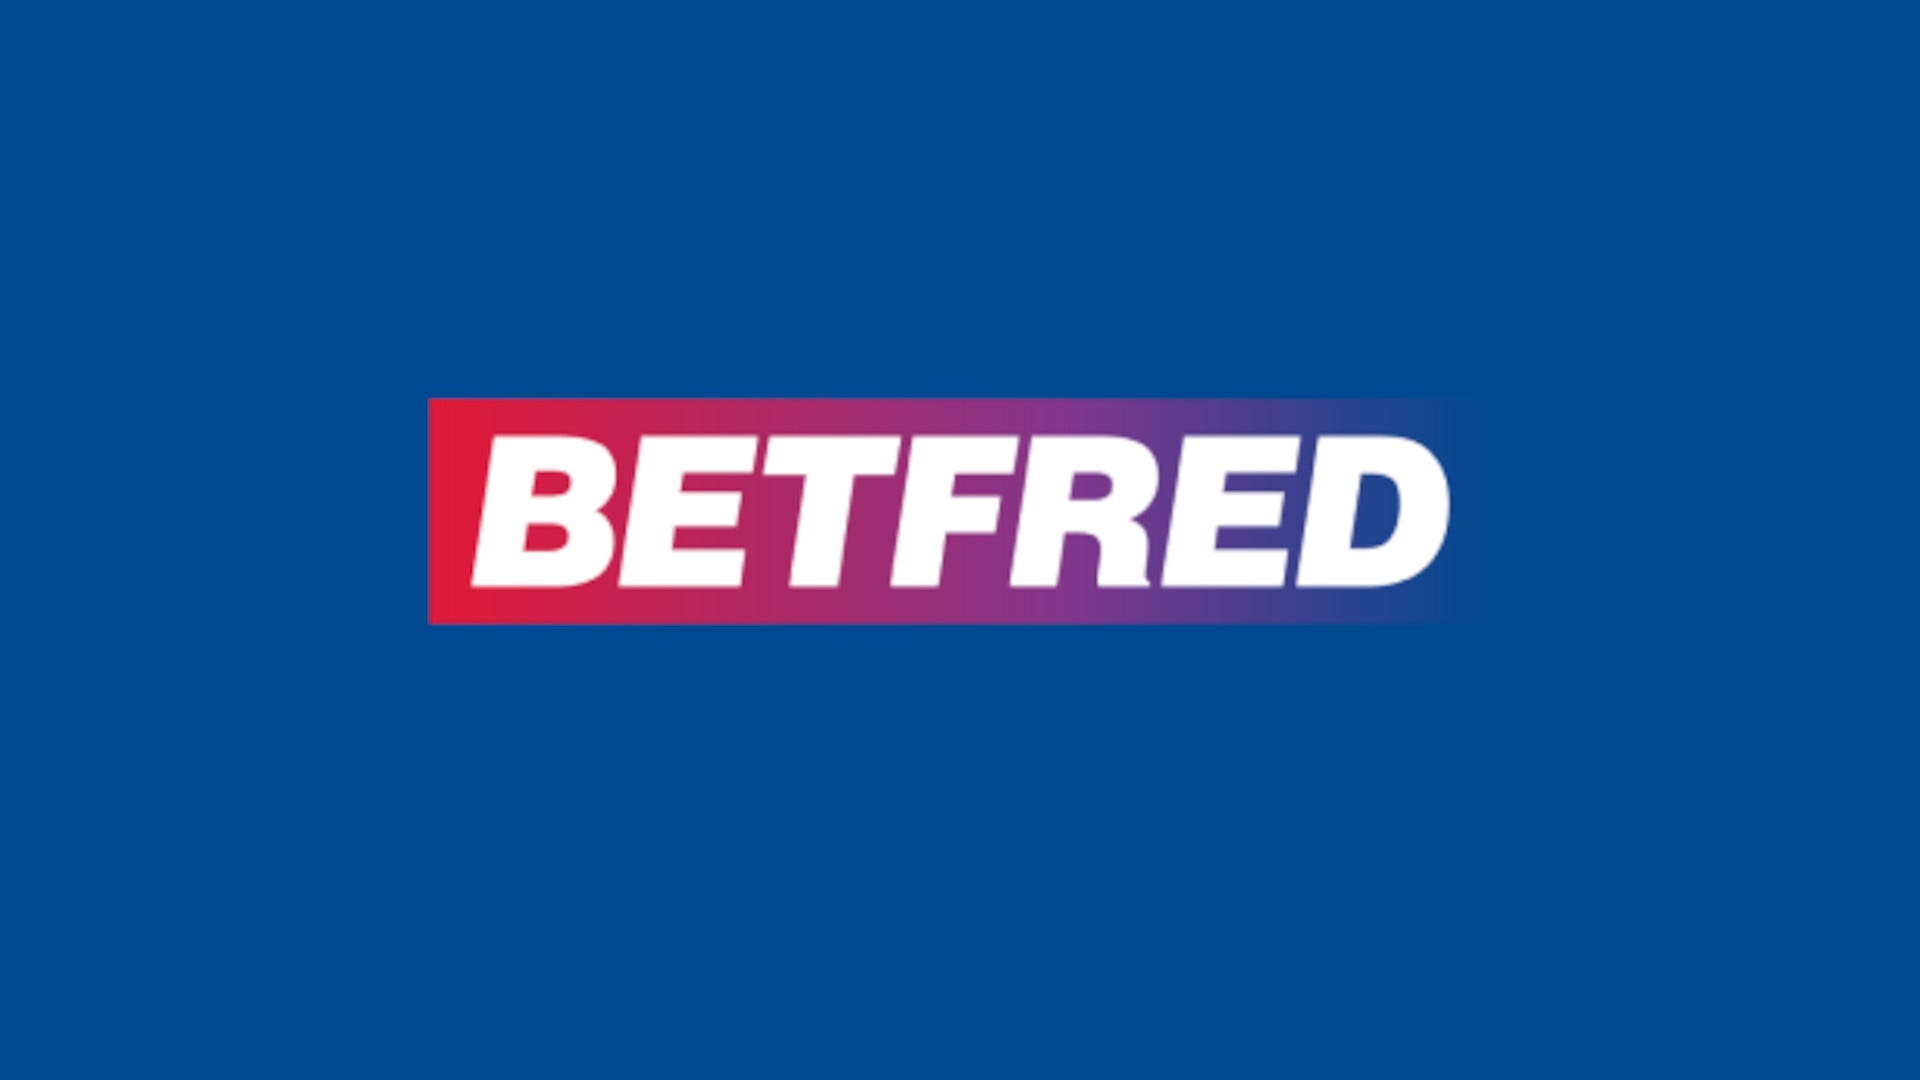 betfred sign up offer